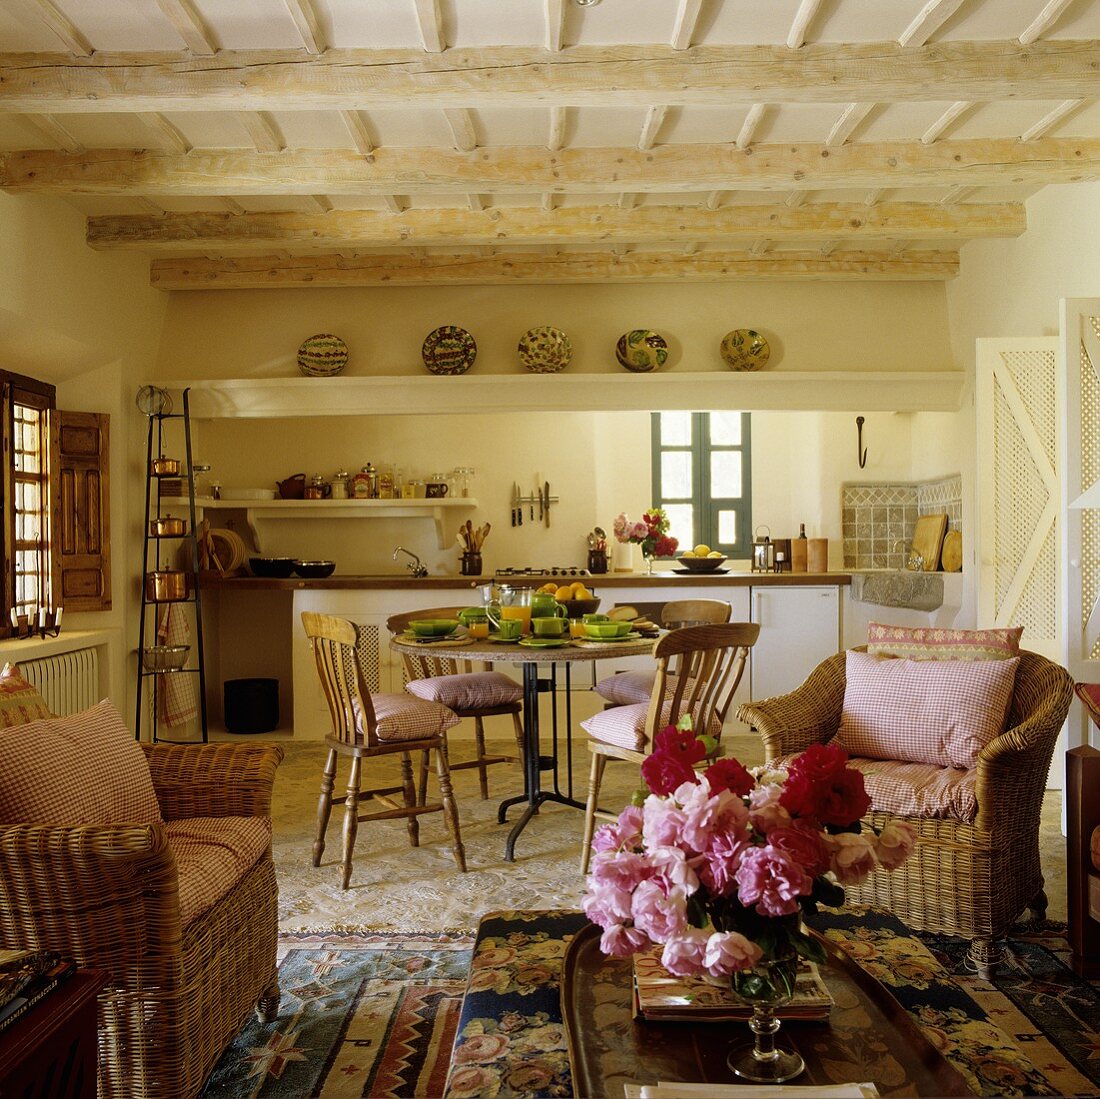 A living room-cum-kitchen with wicker chairs in a simple Mediterranean country house